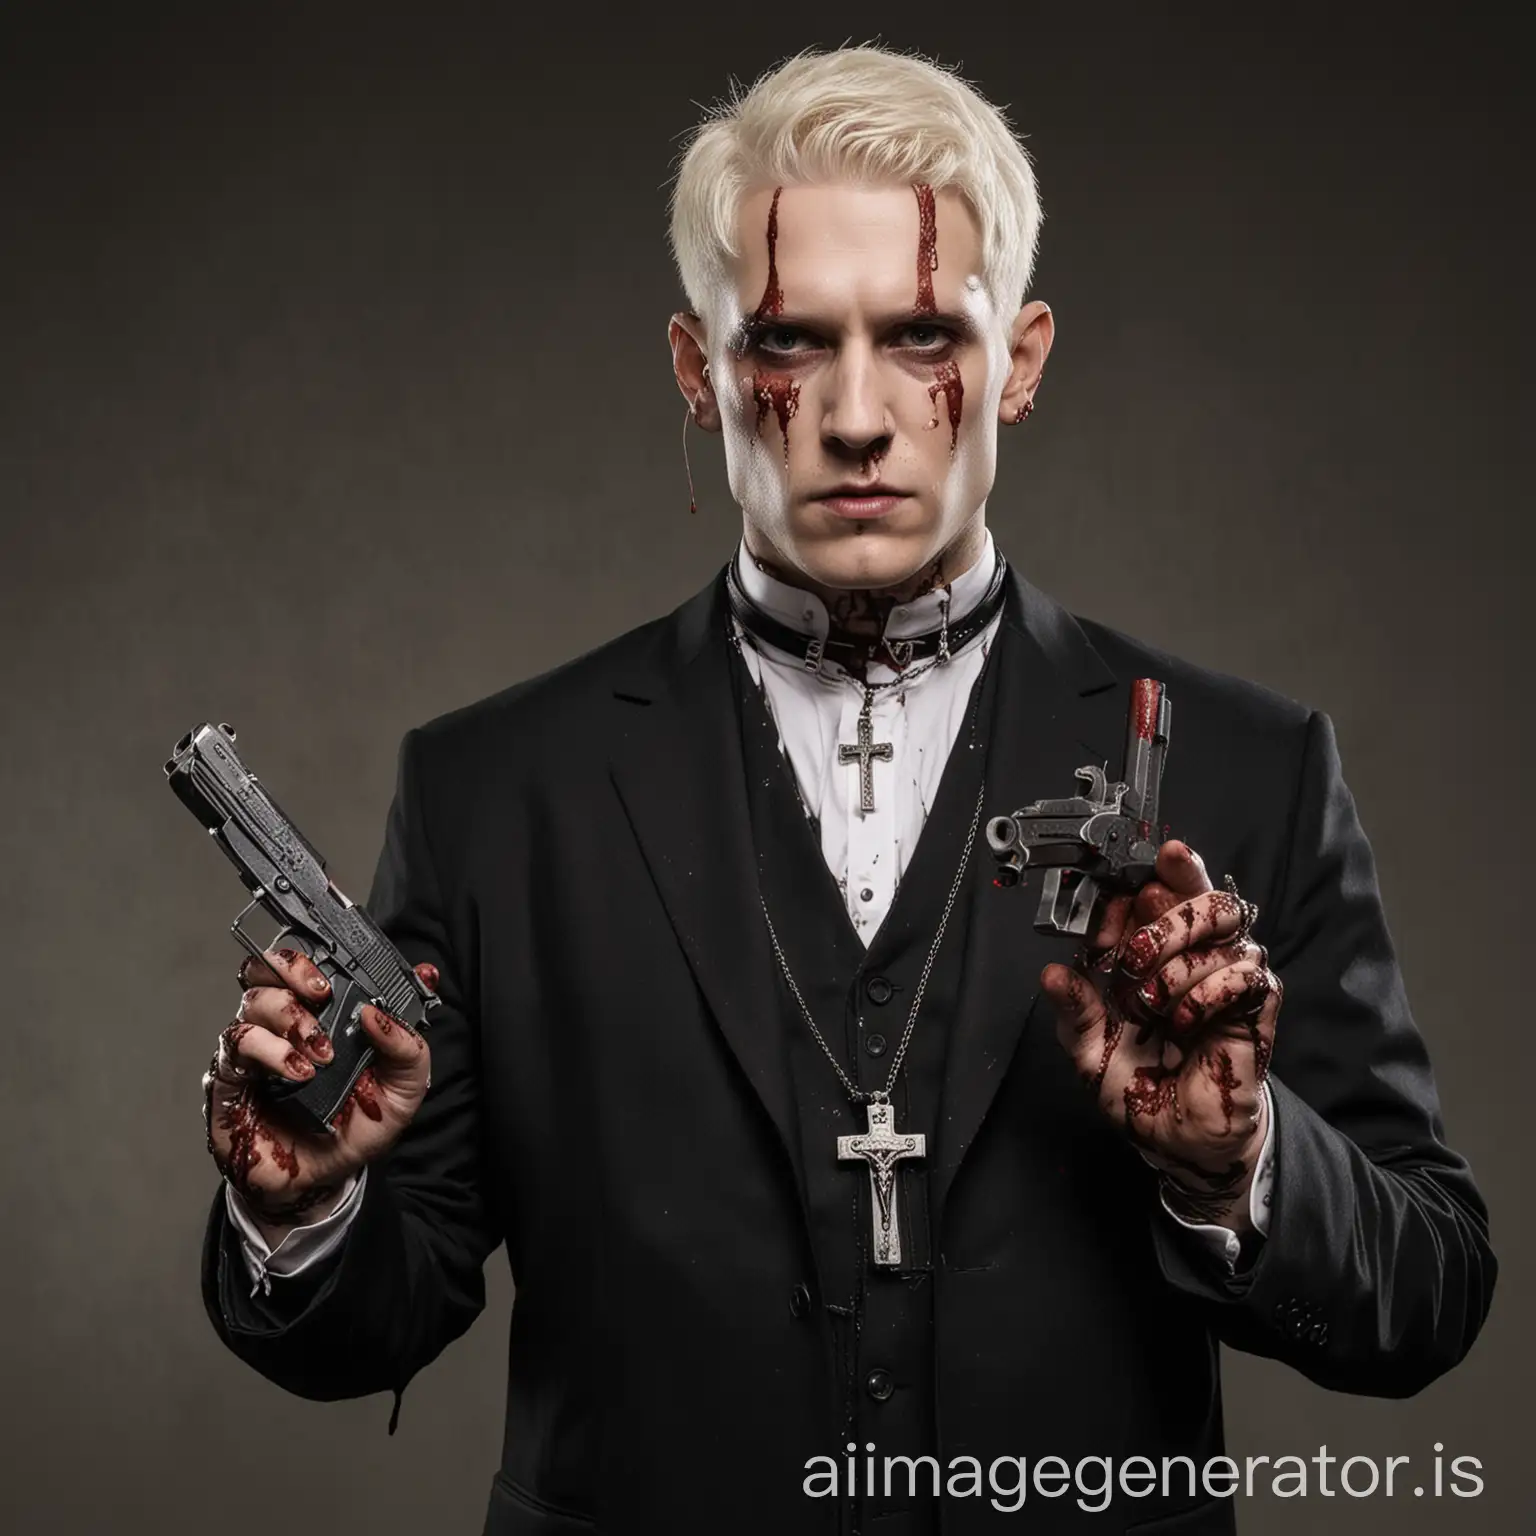 A person with white skin, wearing a black suit, who identifies as Christian, has a cross necklace around their neck, holds a 1911 pistol in one hand pointing towards us, and has a cross on the other hand covered in a lot of blood